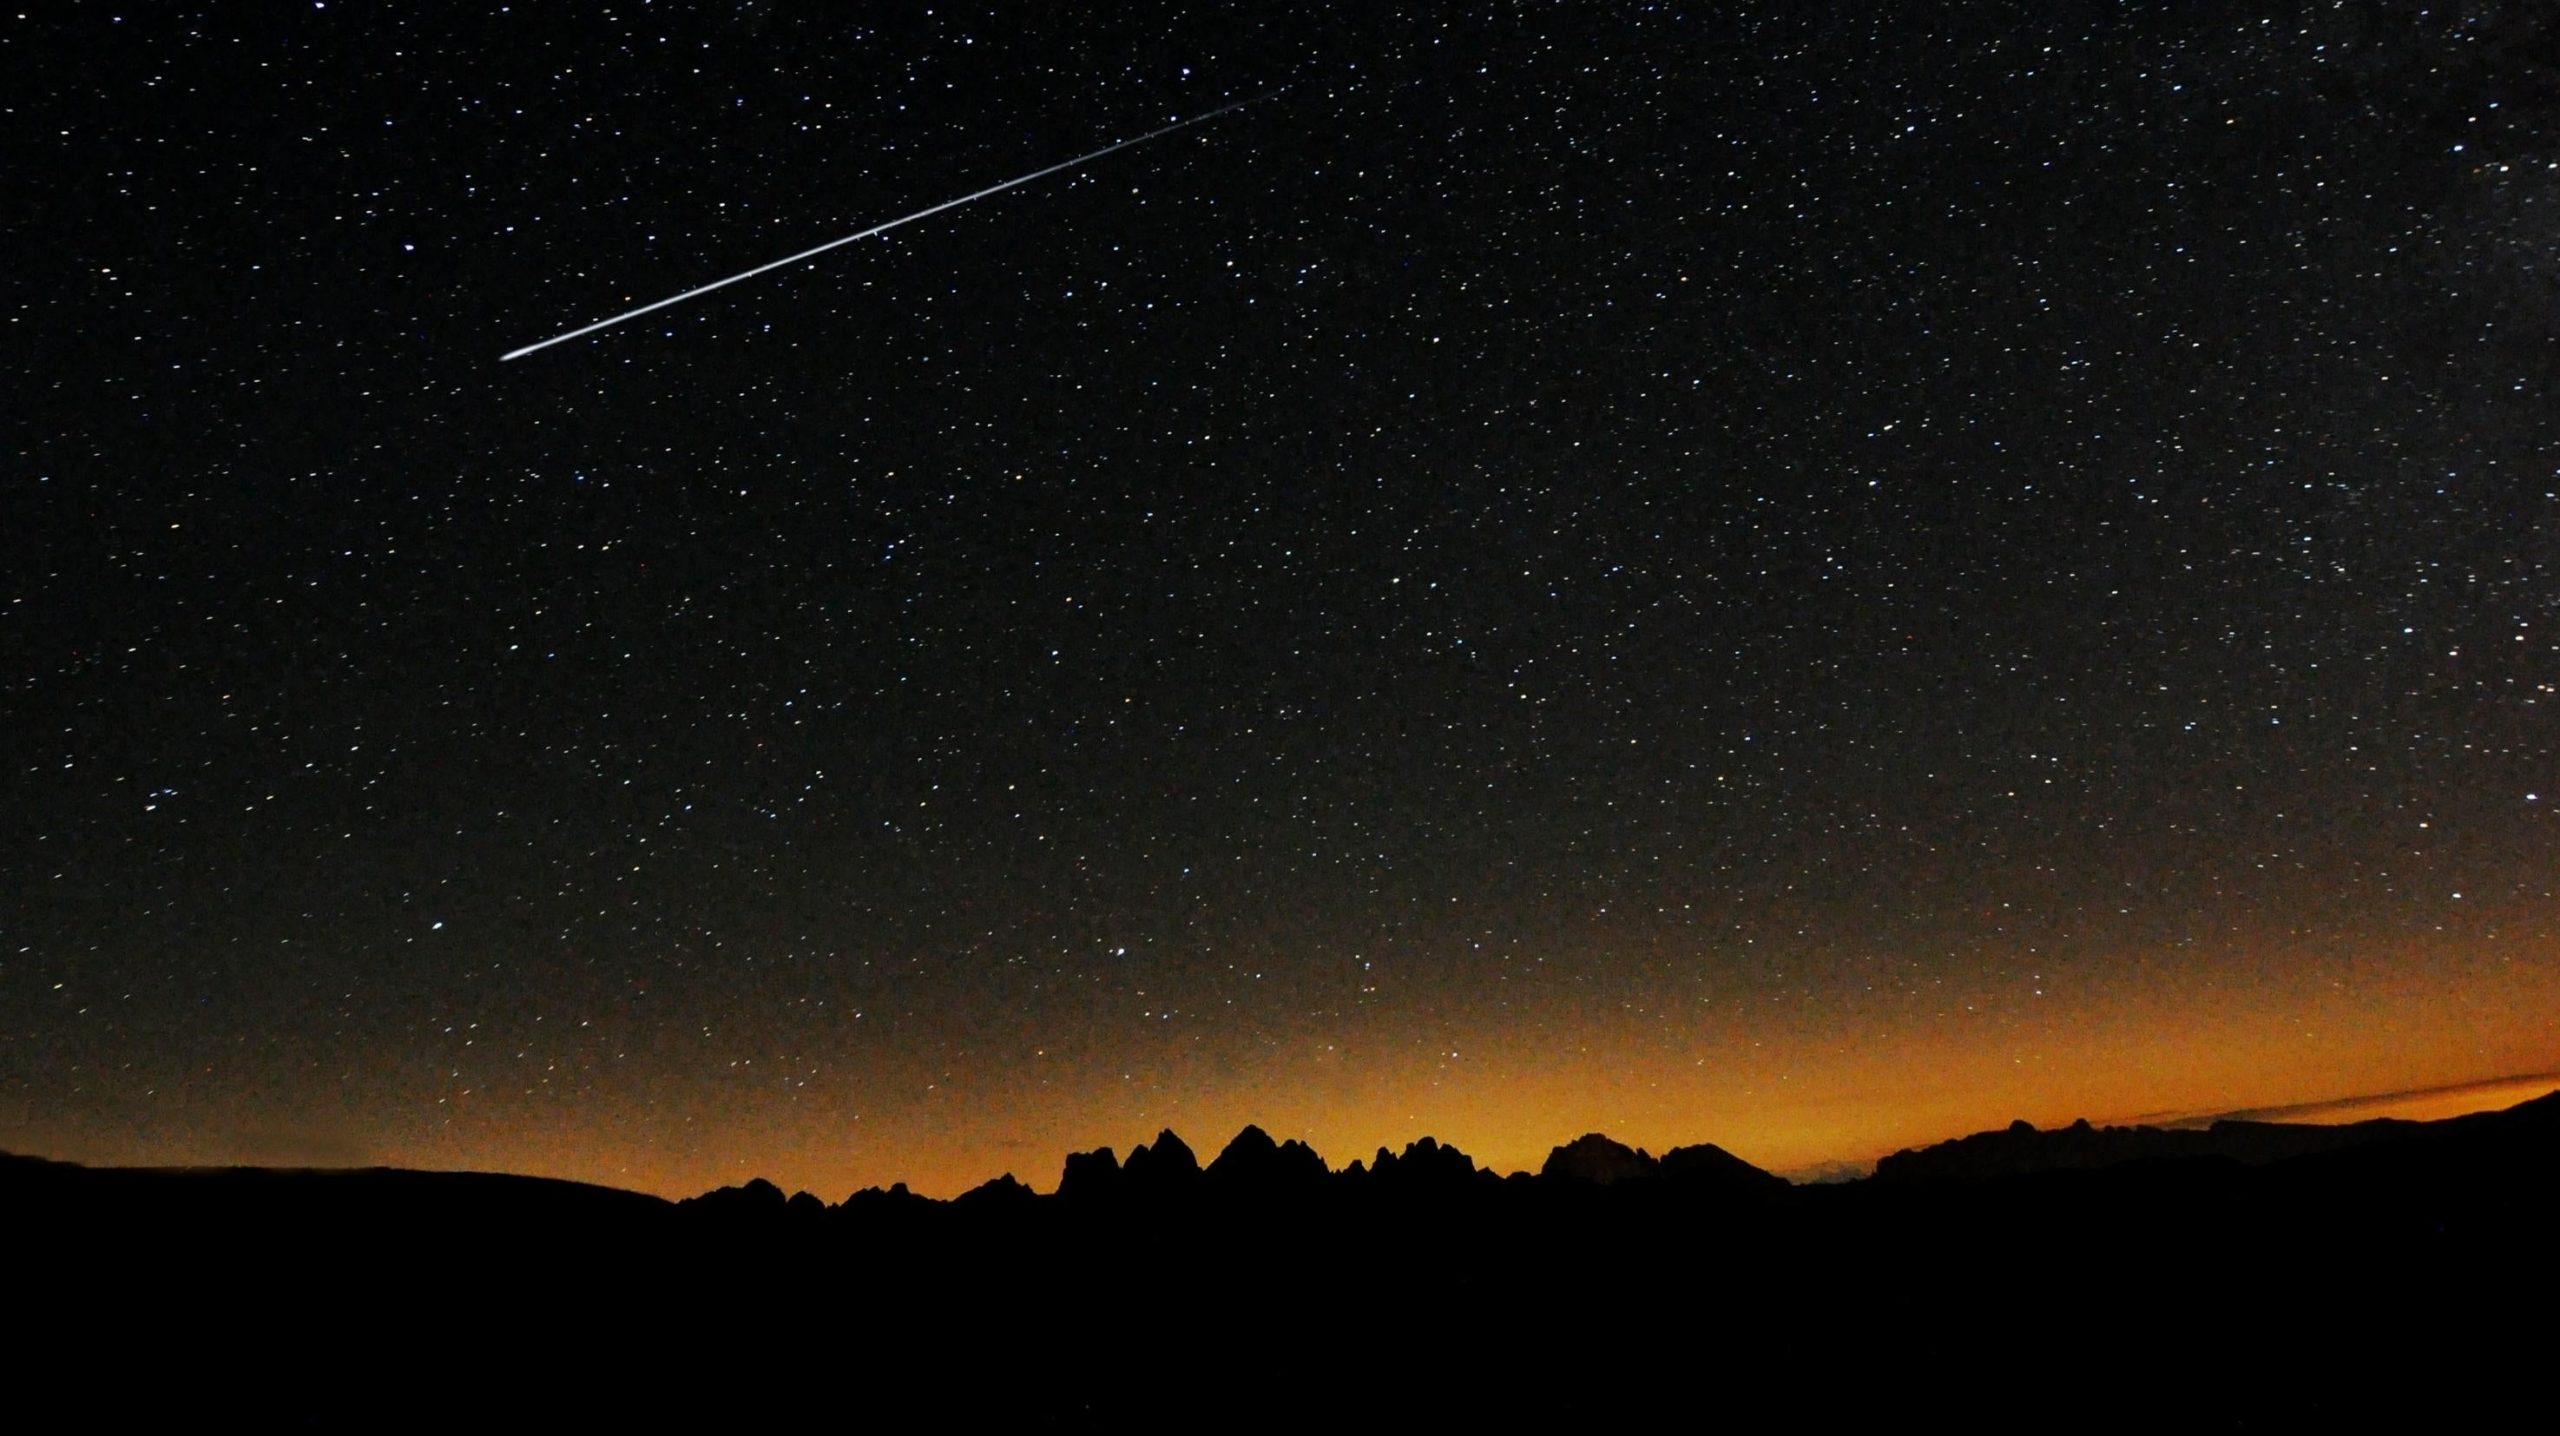 How to See the Perseid Meteor Shower at Peak Brilliance This Week